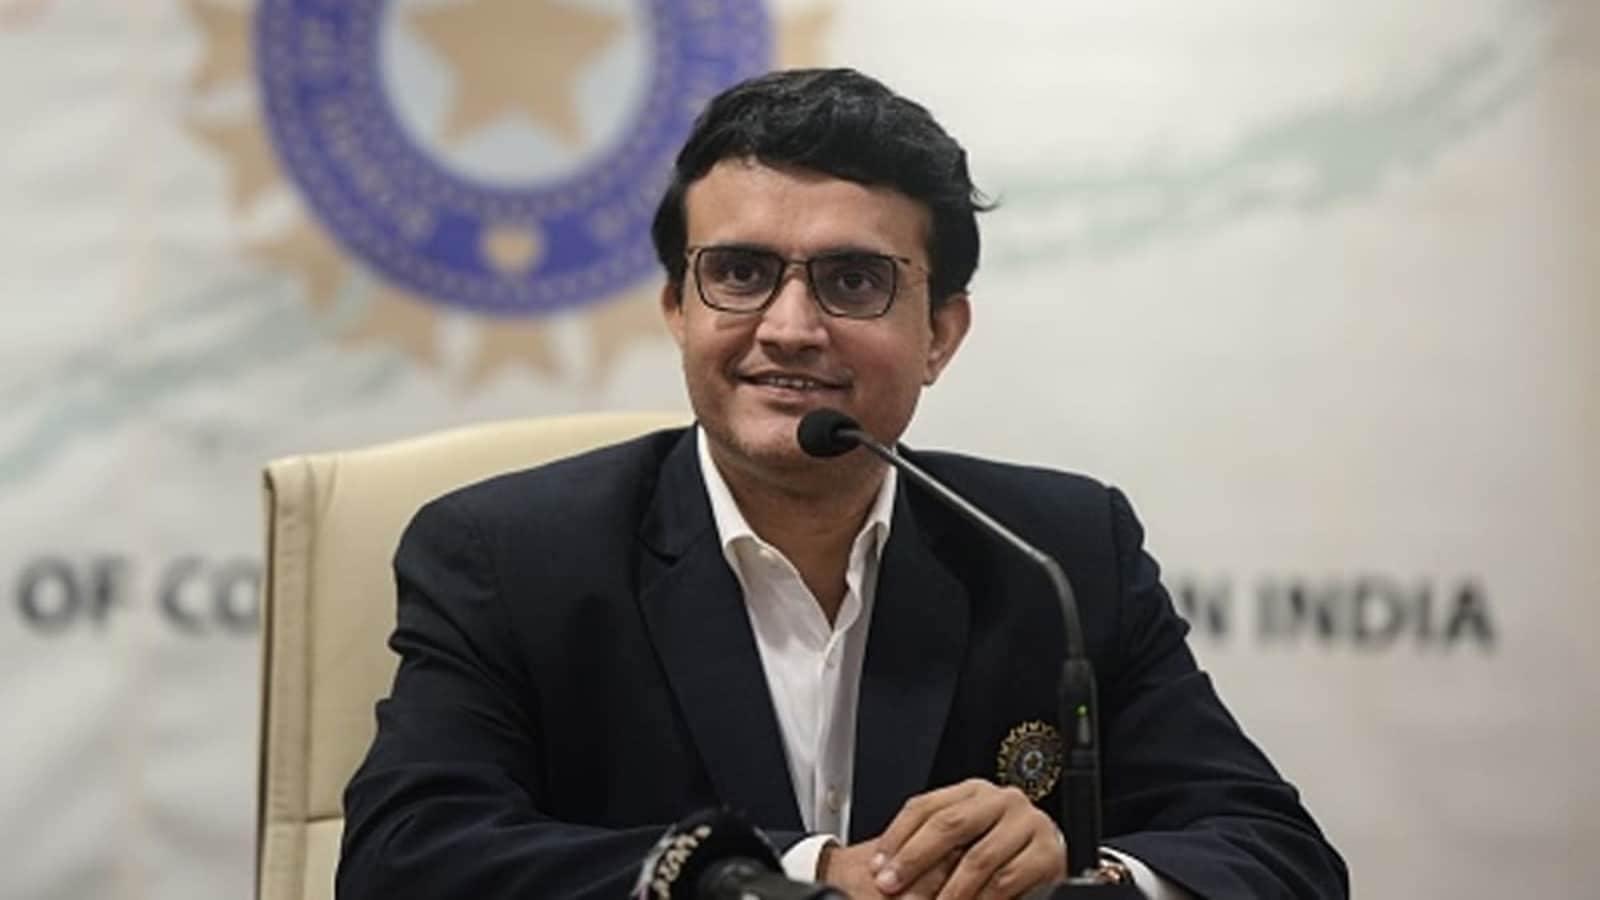 Manchester United-East Bengal Deal: Sourav Ganguly CONFIRMS talks between Manchester United and East Bengal but club official DENIES, claims 'it is HOAX'